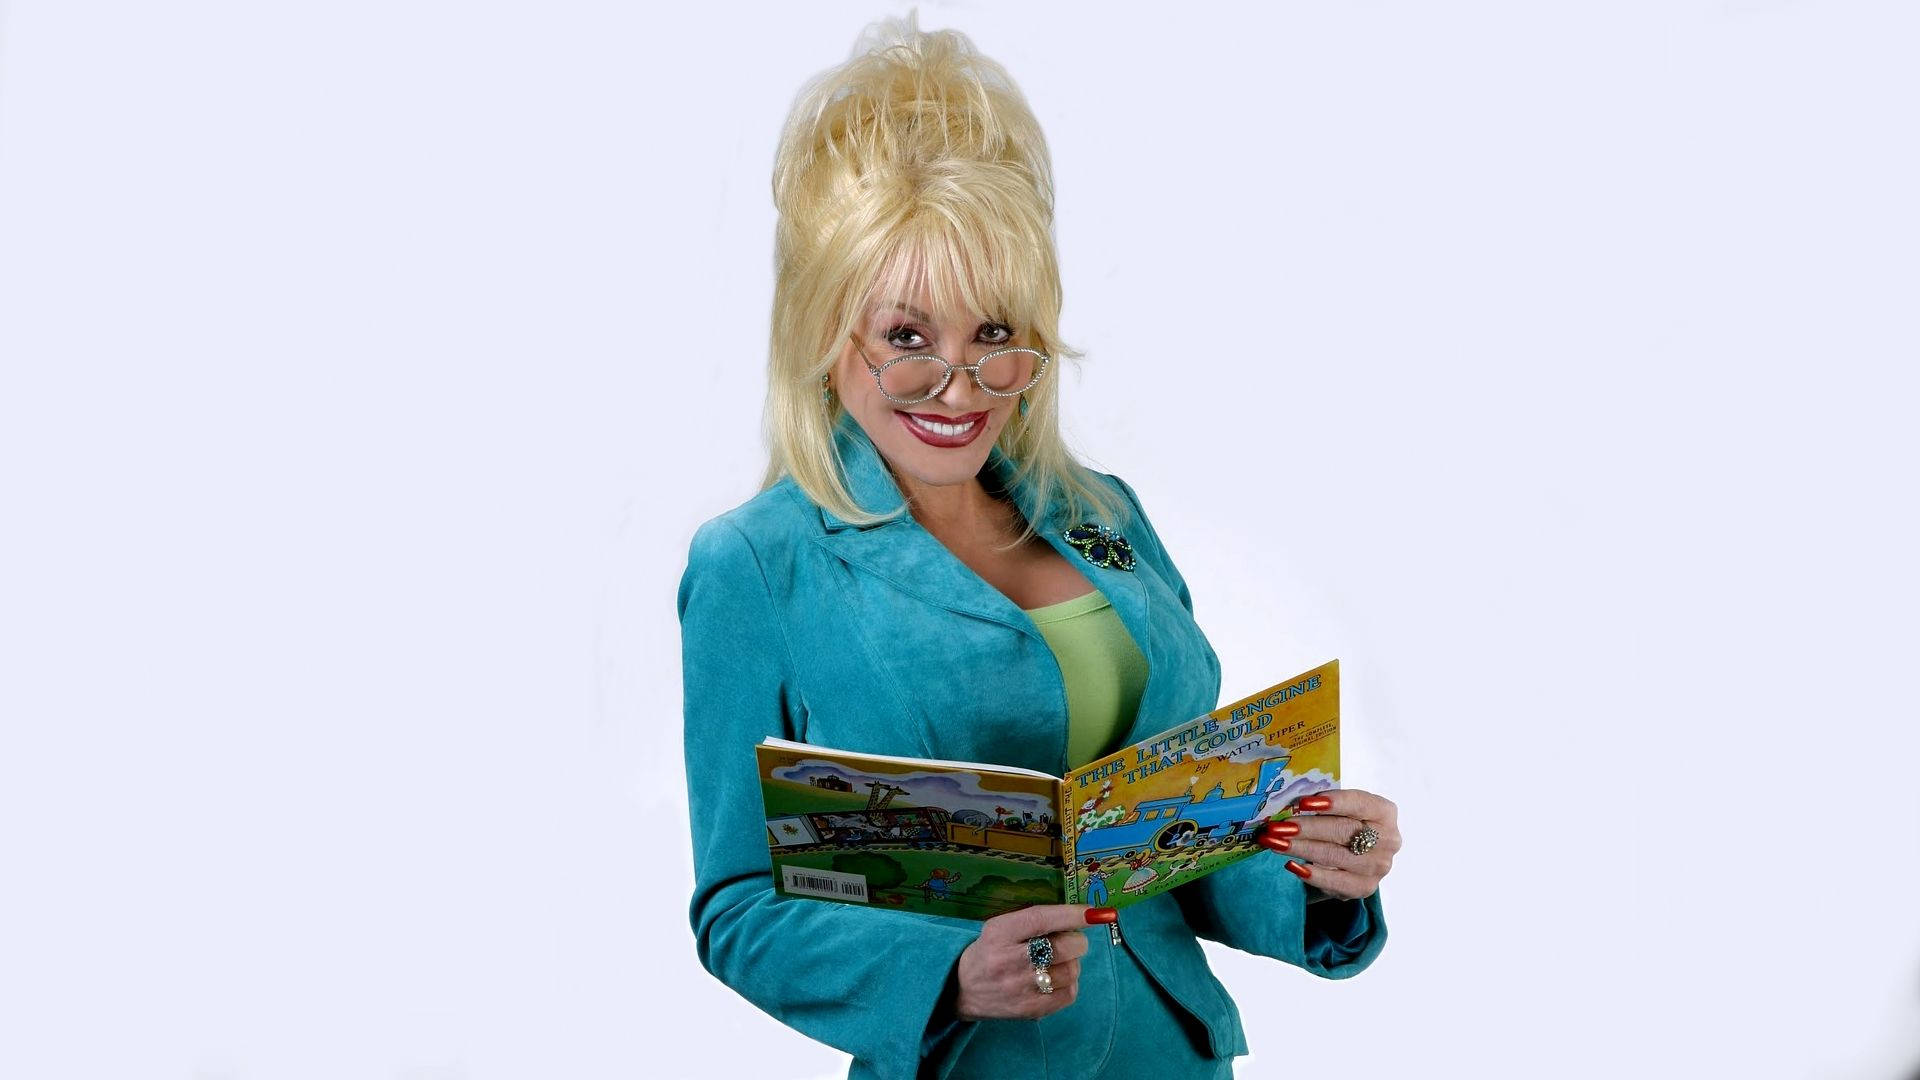 Free Dolly Parton Wallpaper Downloads, [100+] Dolly Parton Wallpapers for  FREE 